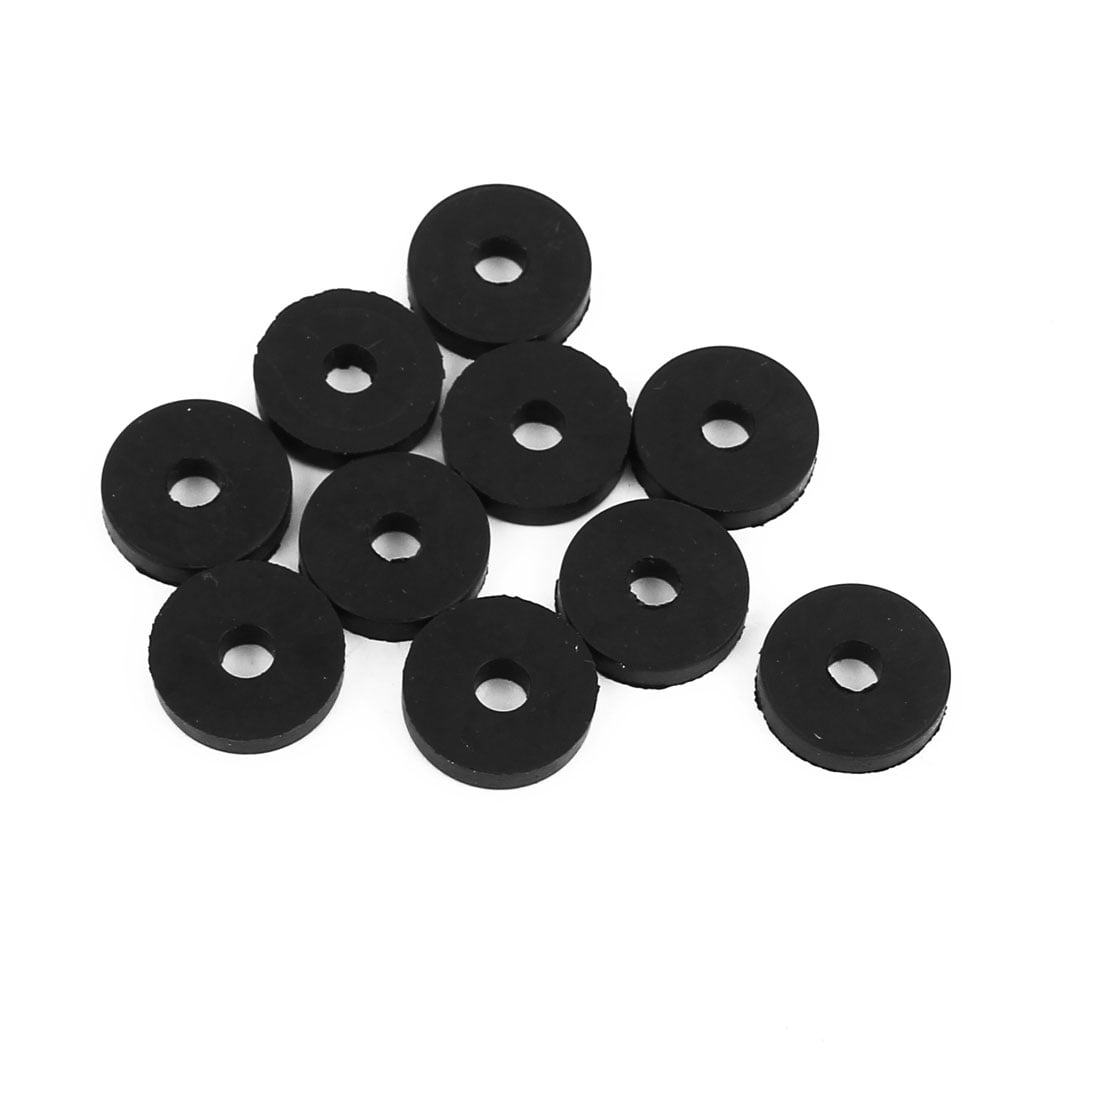 2mm OD 5-24mm White FOOD GRADE Silicone Gasket O Ring Seal Waterproof Washer 